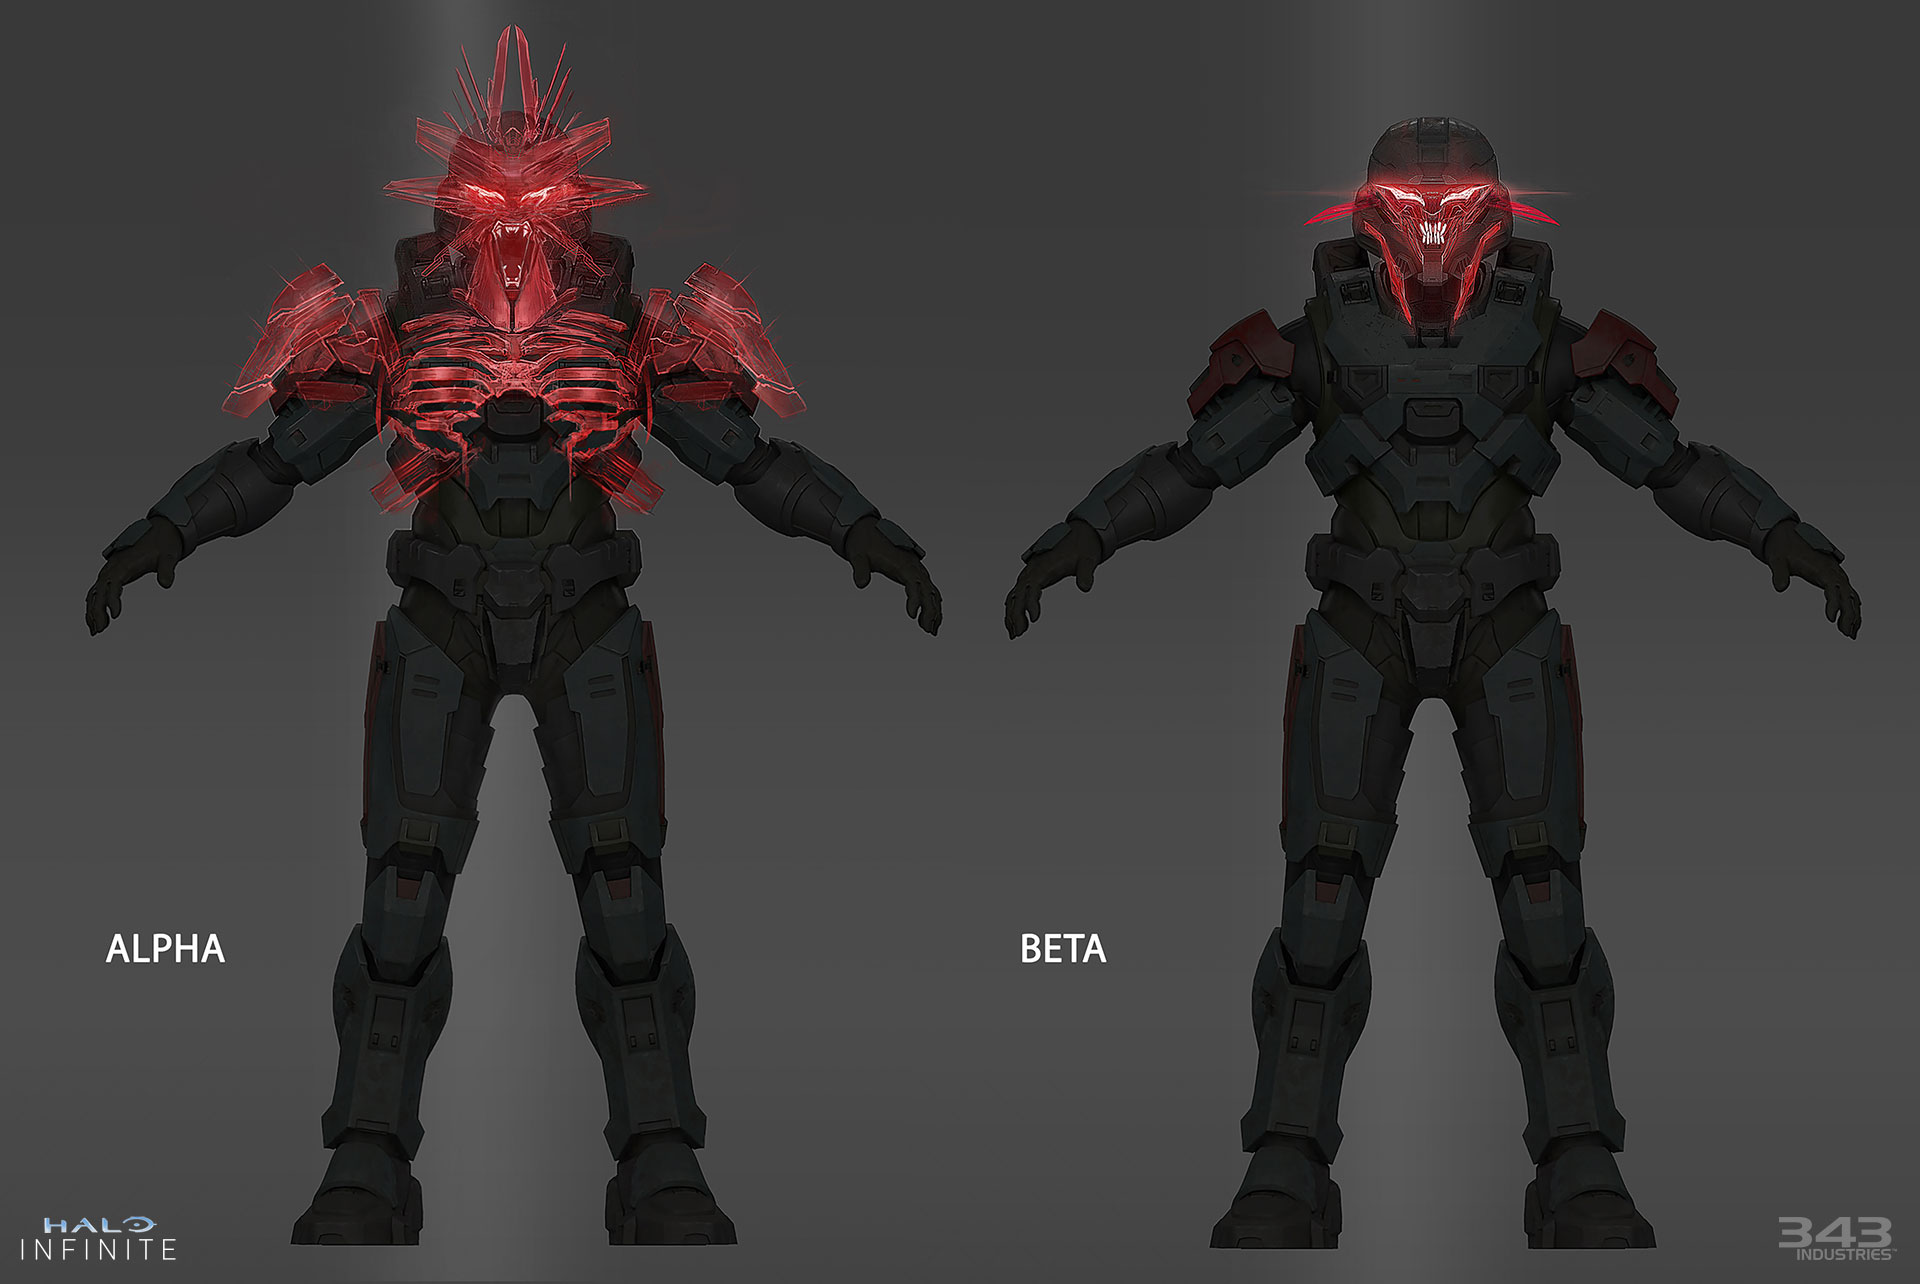 Halo Infinite concept art of Alpha and Beta Infected showing the different Iratus effects